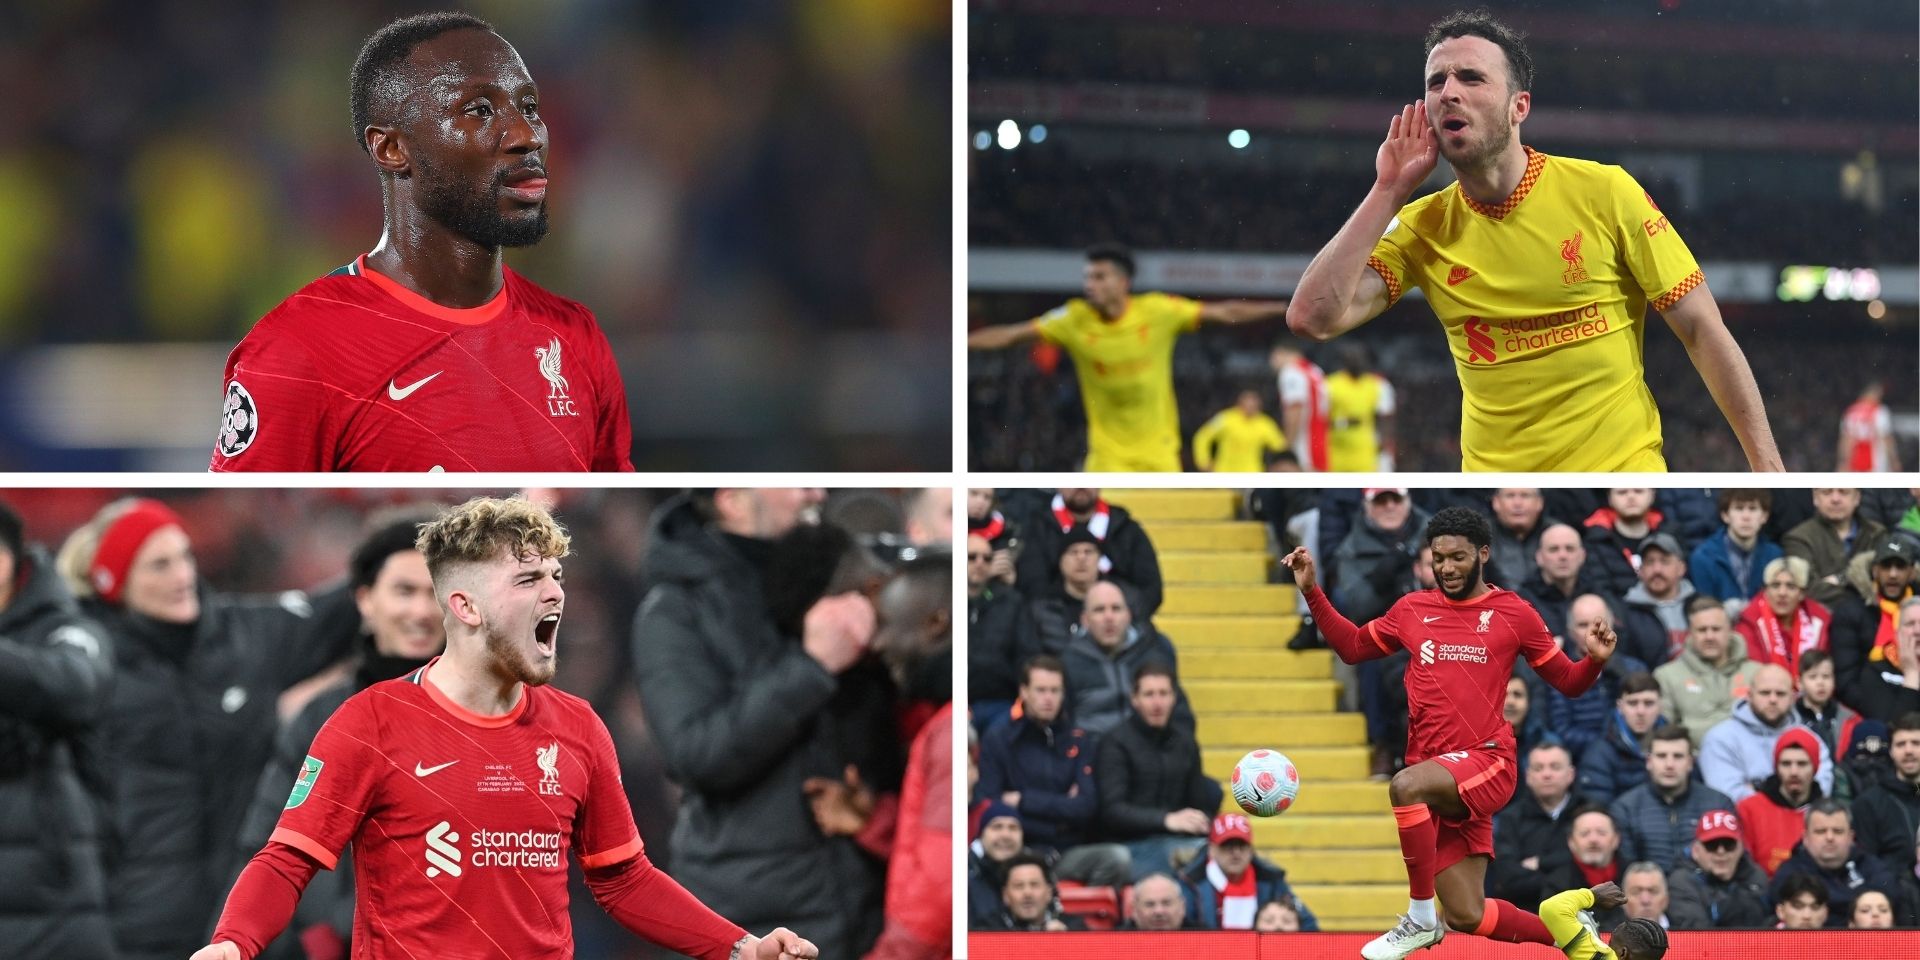 Four Liverpool players expected to sign new contracts at Anfield with Mo Salah’s deal remaining ‘unresolved, with no progression’